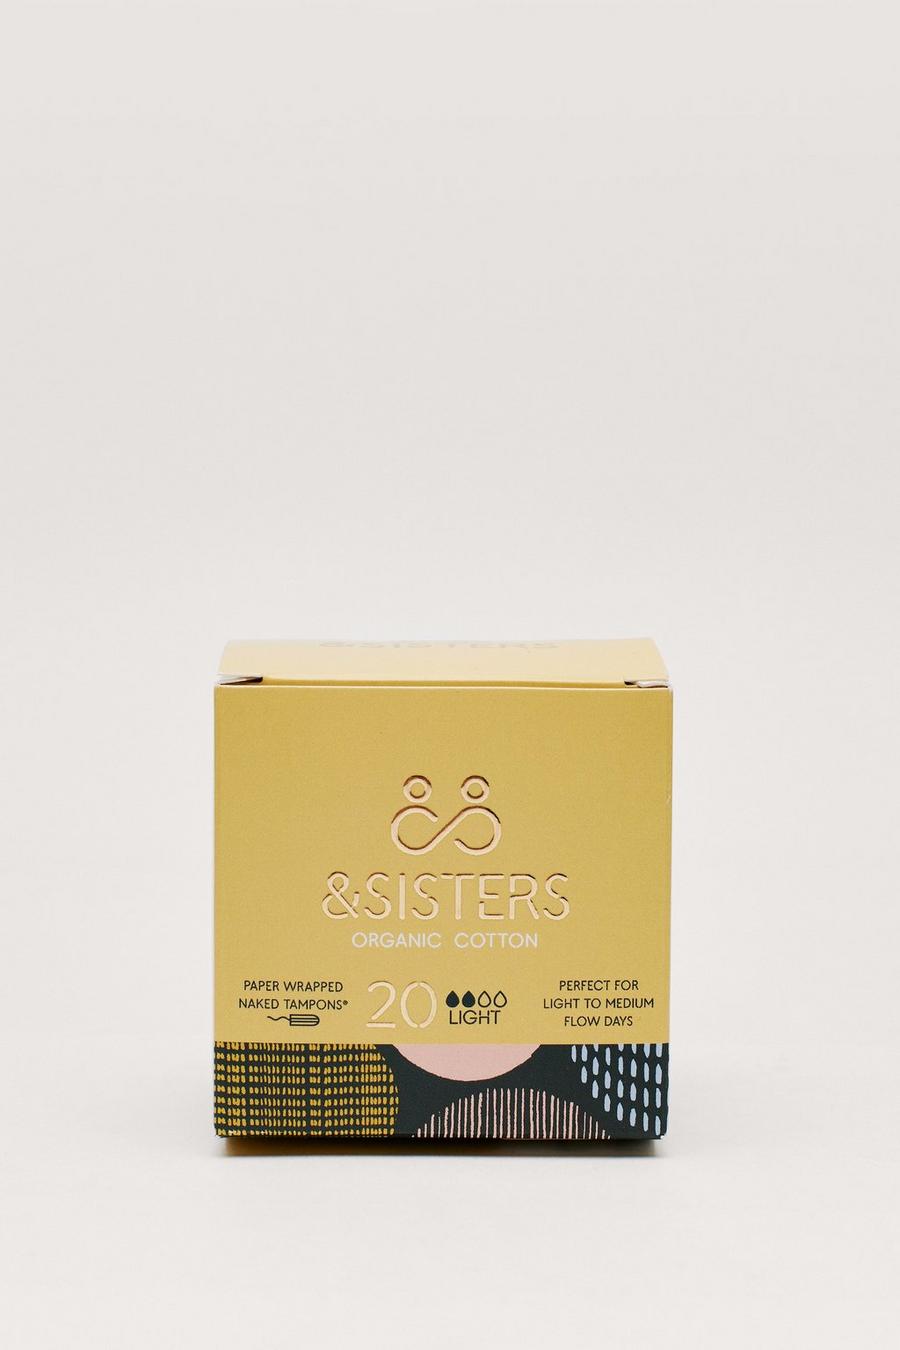 &Sisters 20 Light Organic Cotton Tampons